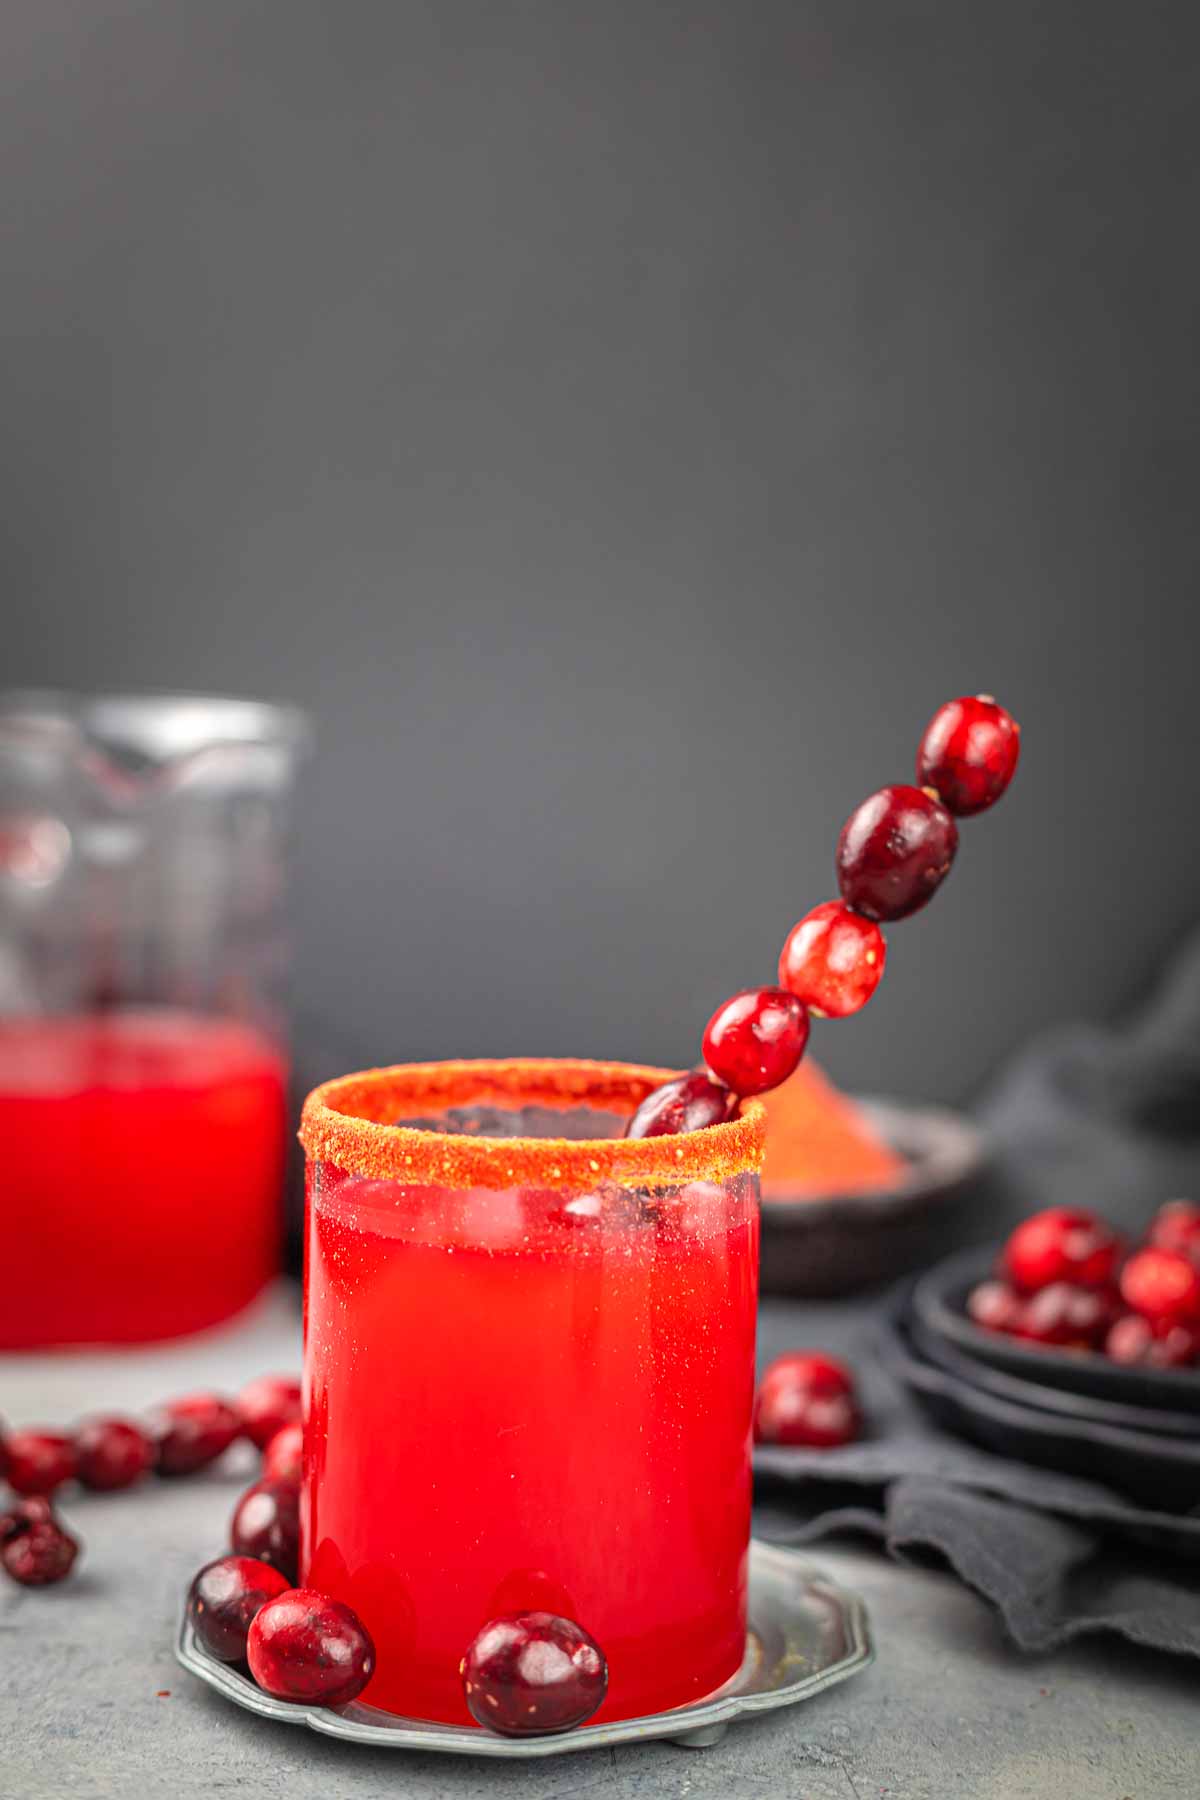 A cranberry juice in a glass with cranberries.